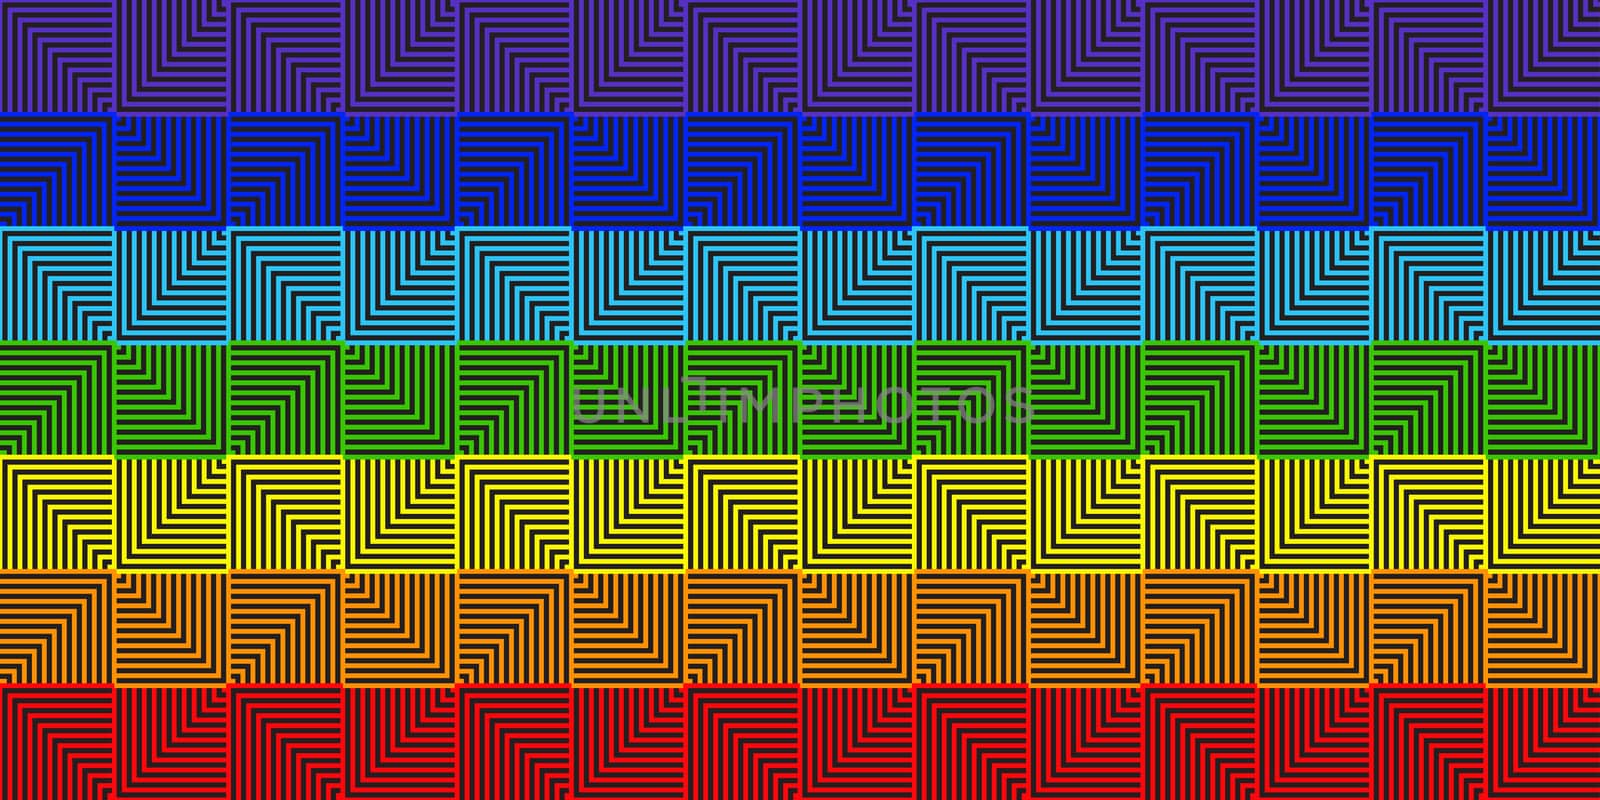 Abstract line square rainbow geometric background - Vector illustration